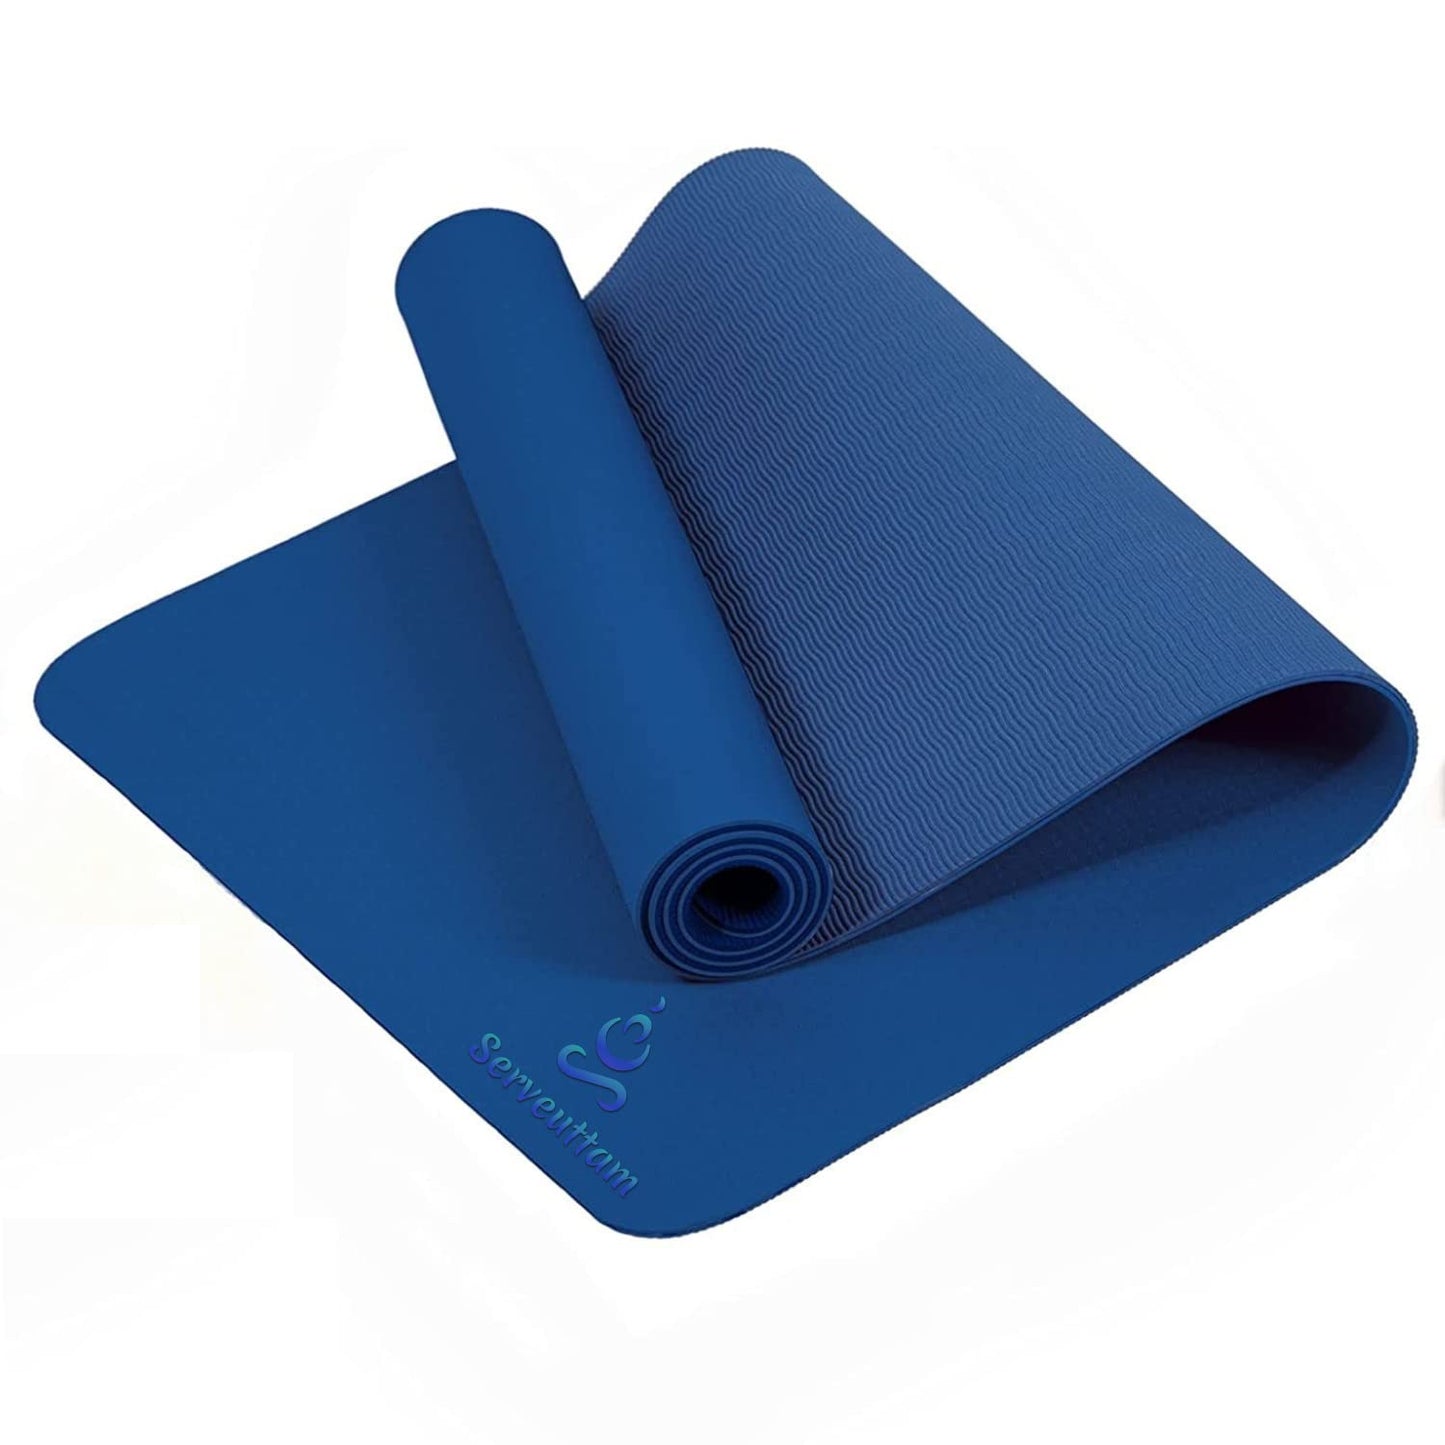 Yoga mat for exercise at home - 6mm Thick Eco Friendly Made of TPE Yoga Mats | Gym Mat Easy to Fold and Clean